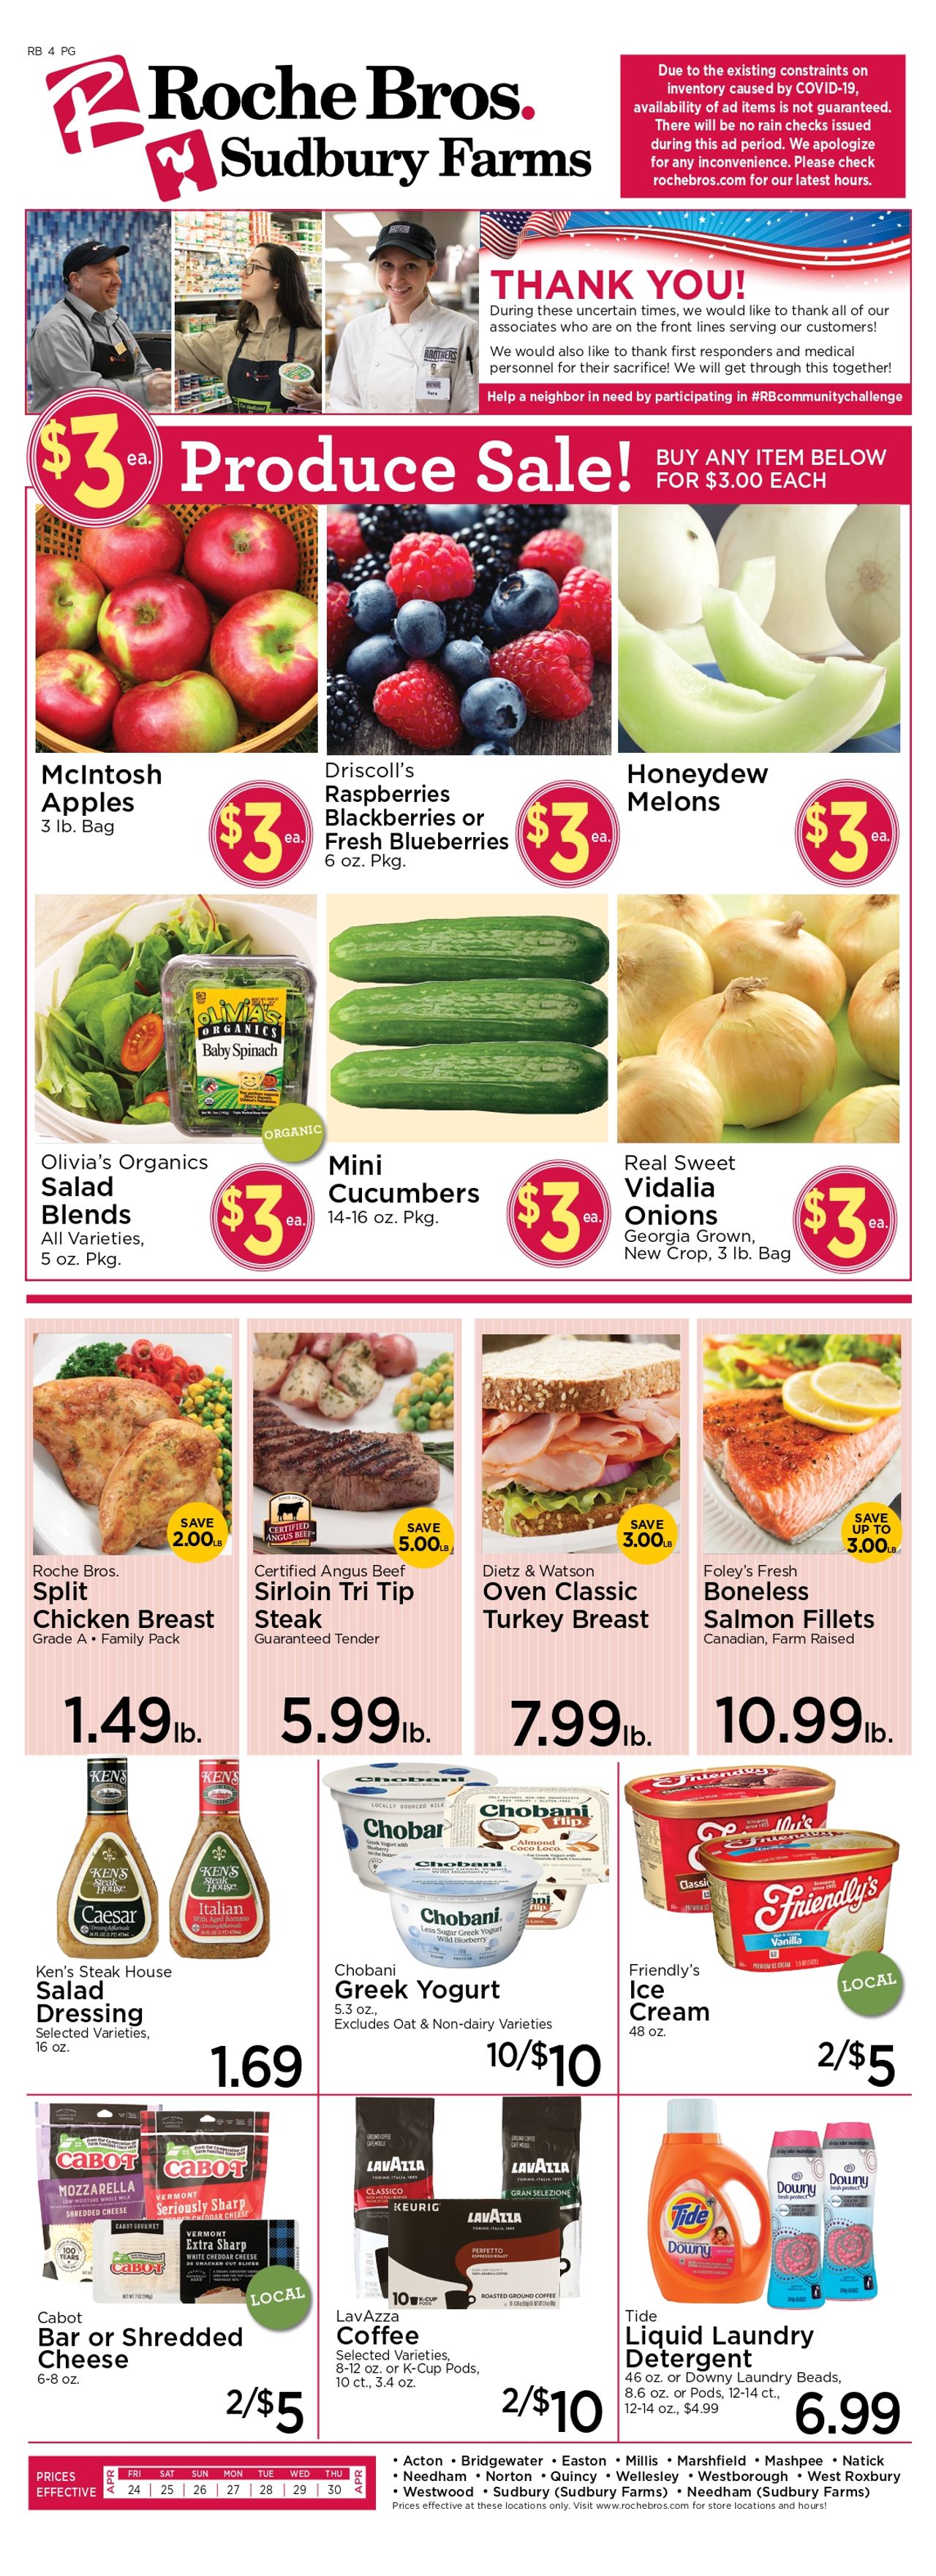 Roche Bros. Weekly Ad 04/24/20